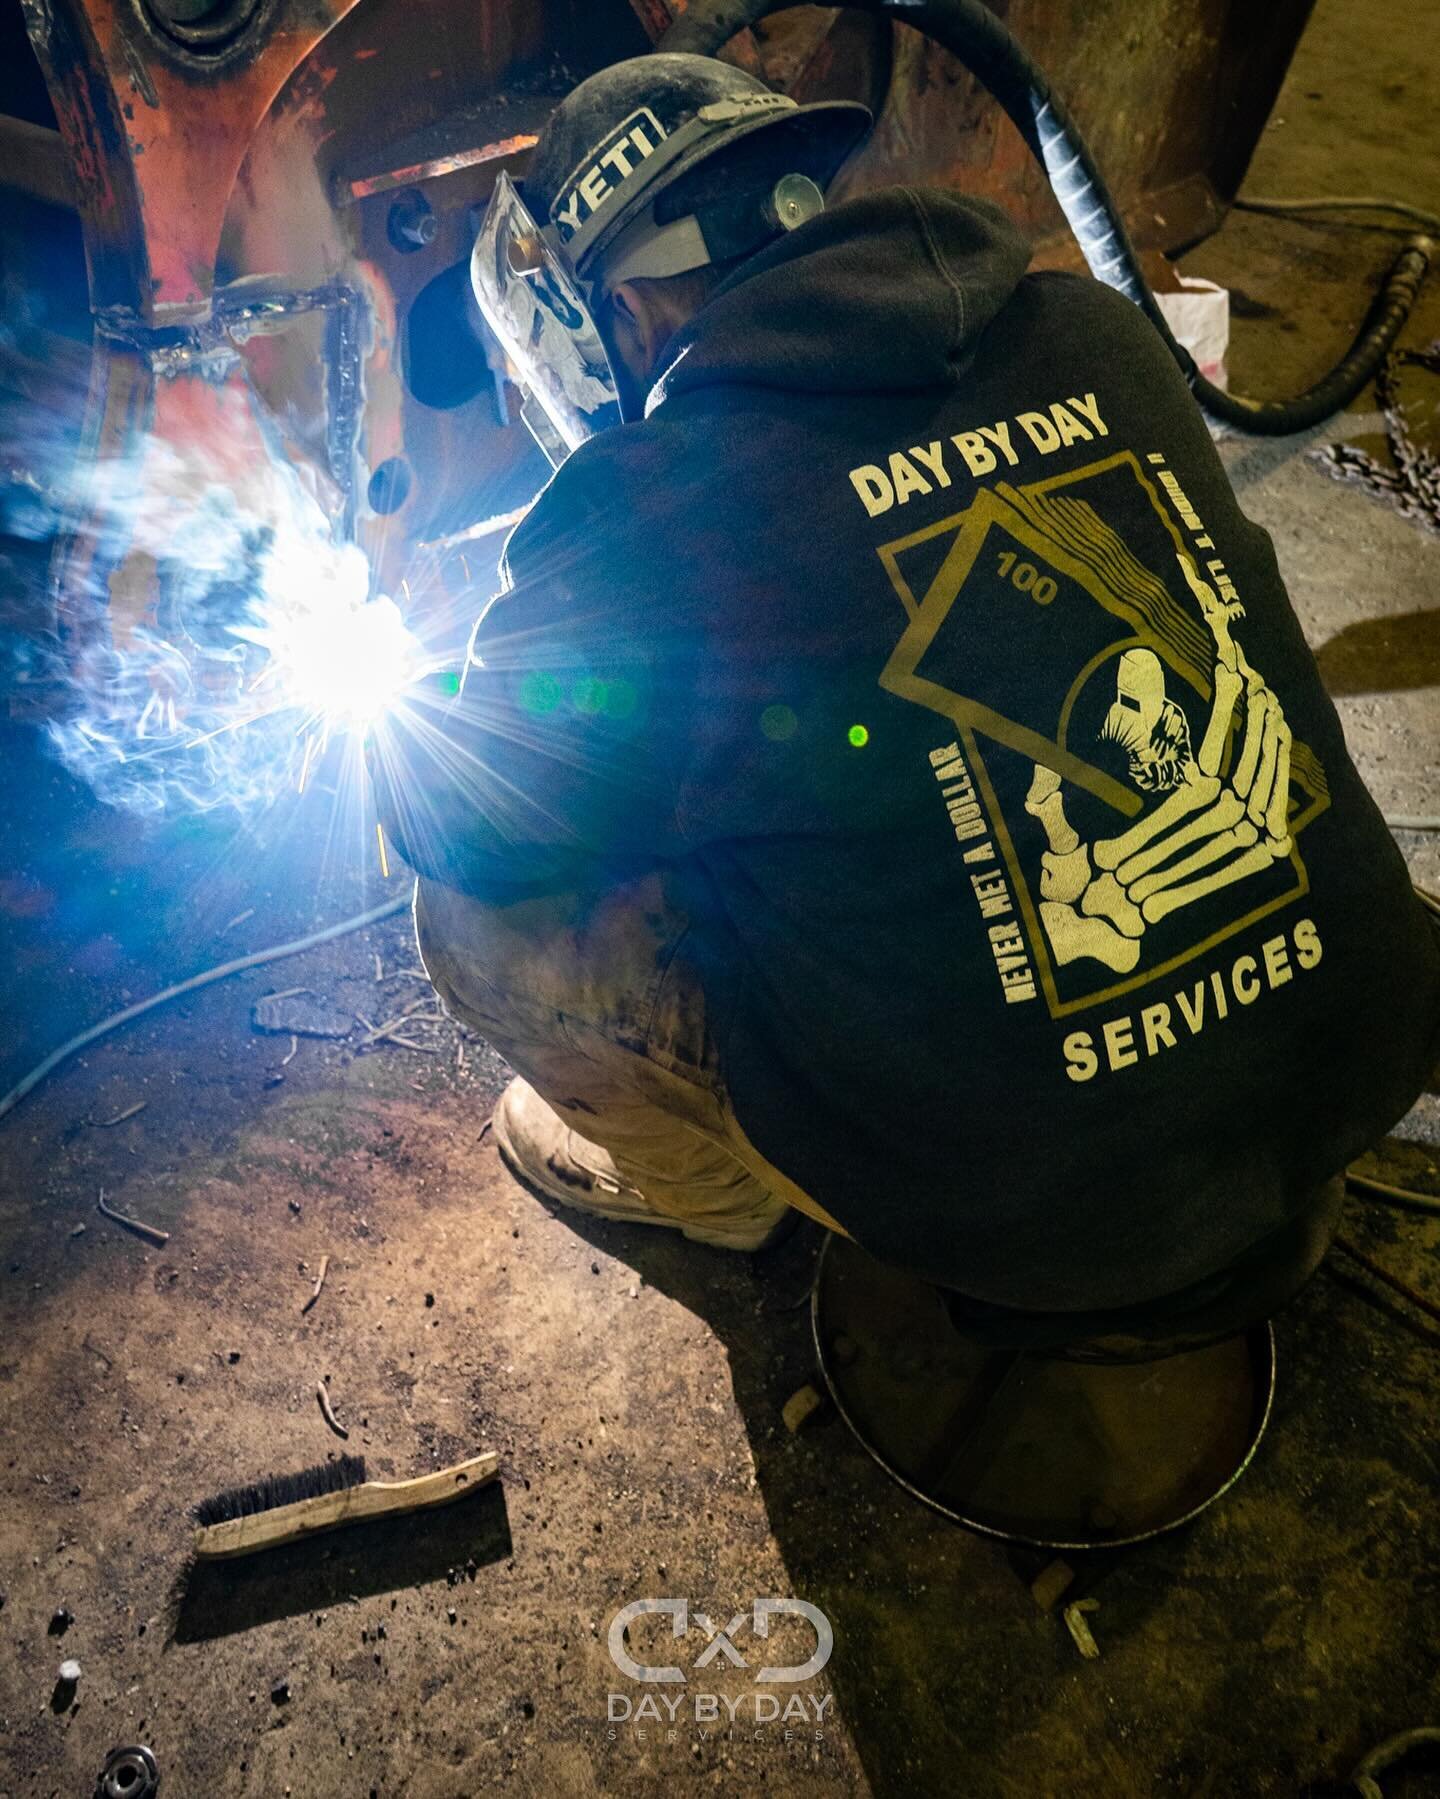 Nothing is easy, or freely given, go f*cking earn it! ____________________________________________________
#welding #stickwelding #excavator #excavatorattachment #latenights #earlymornings #hardwork #workforit #dayxdayservices #daybydayservices